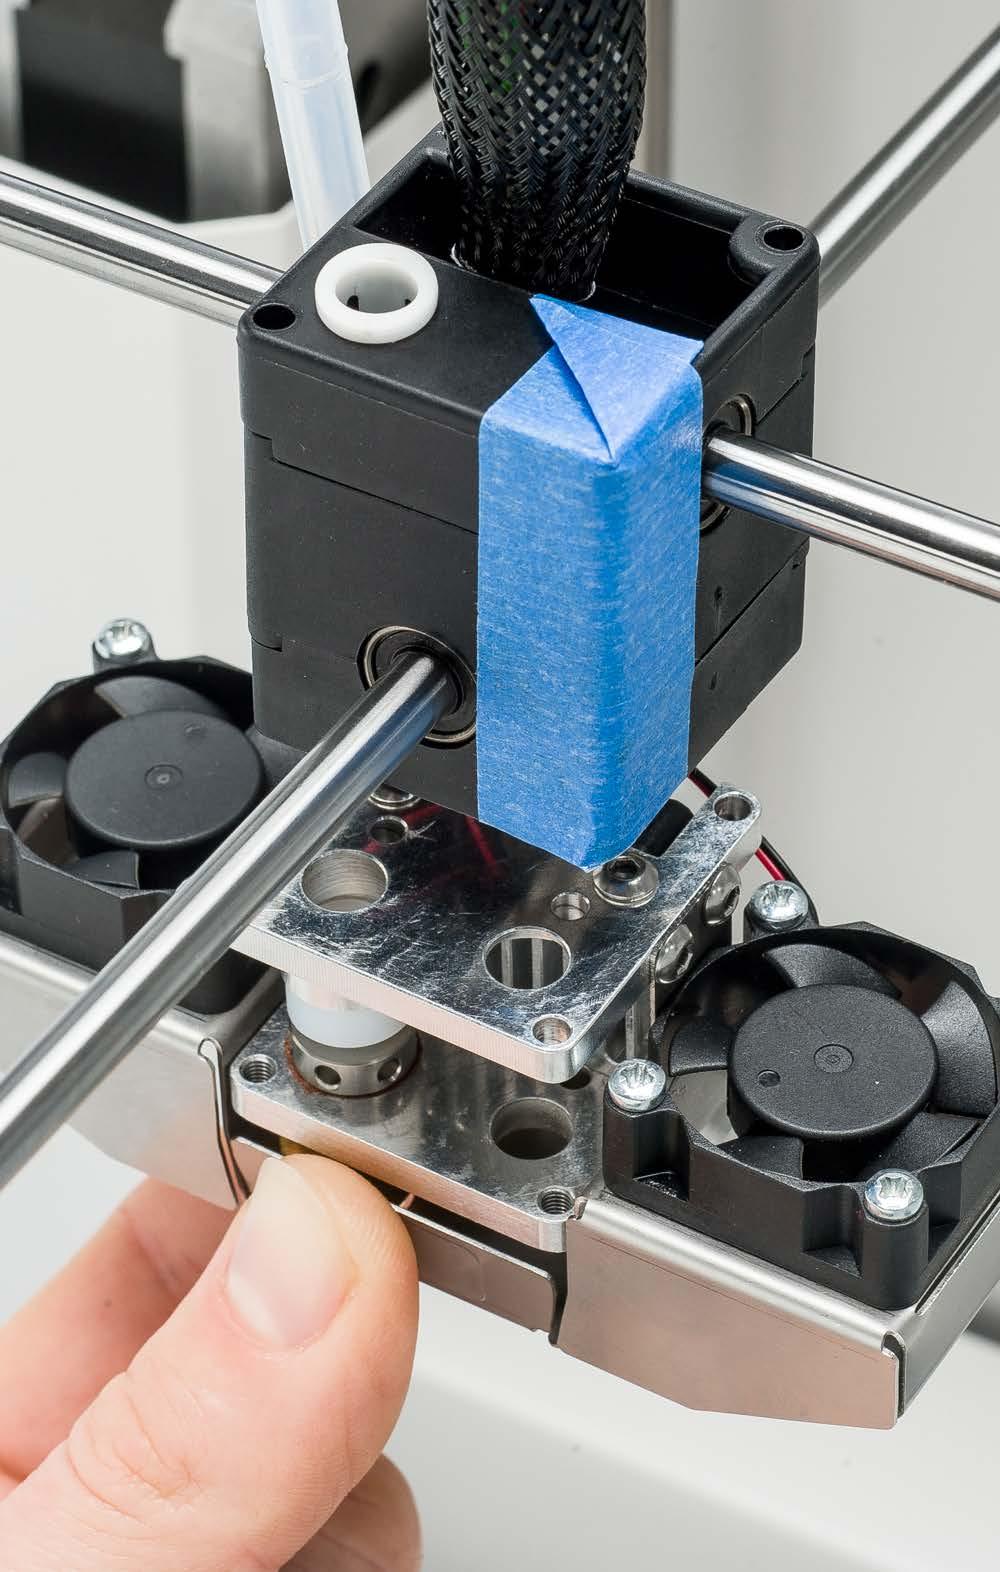 Put some blue tape around the three parts of the print head housing.